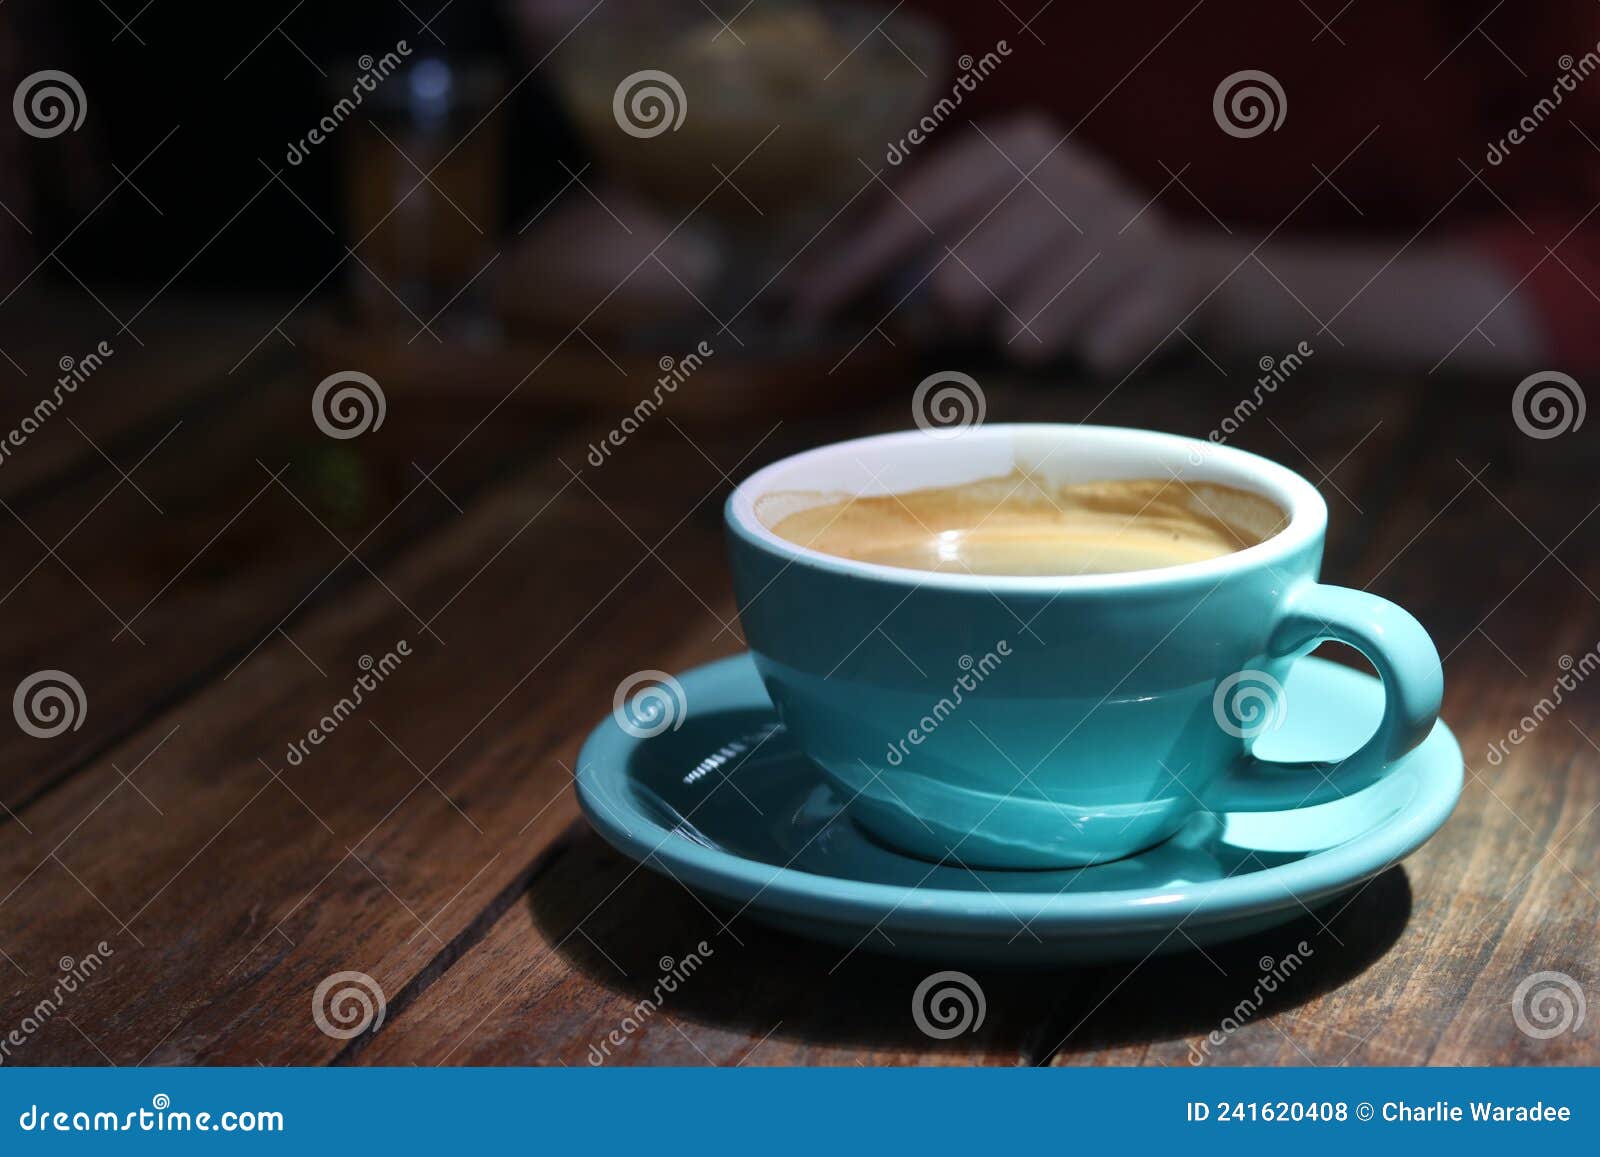 hot black coffee in blue ceramic cup on wooden table background.